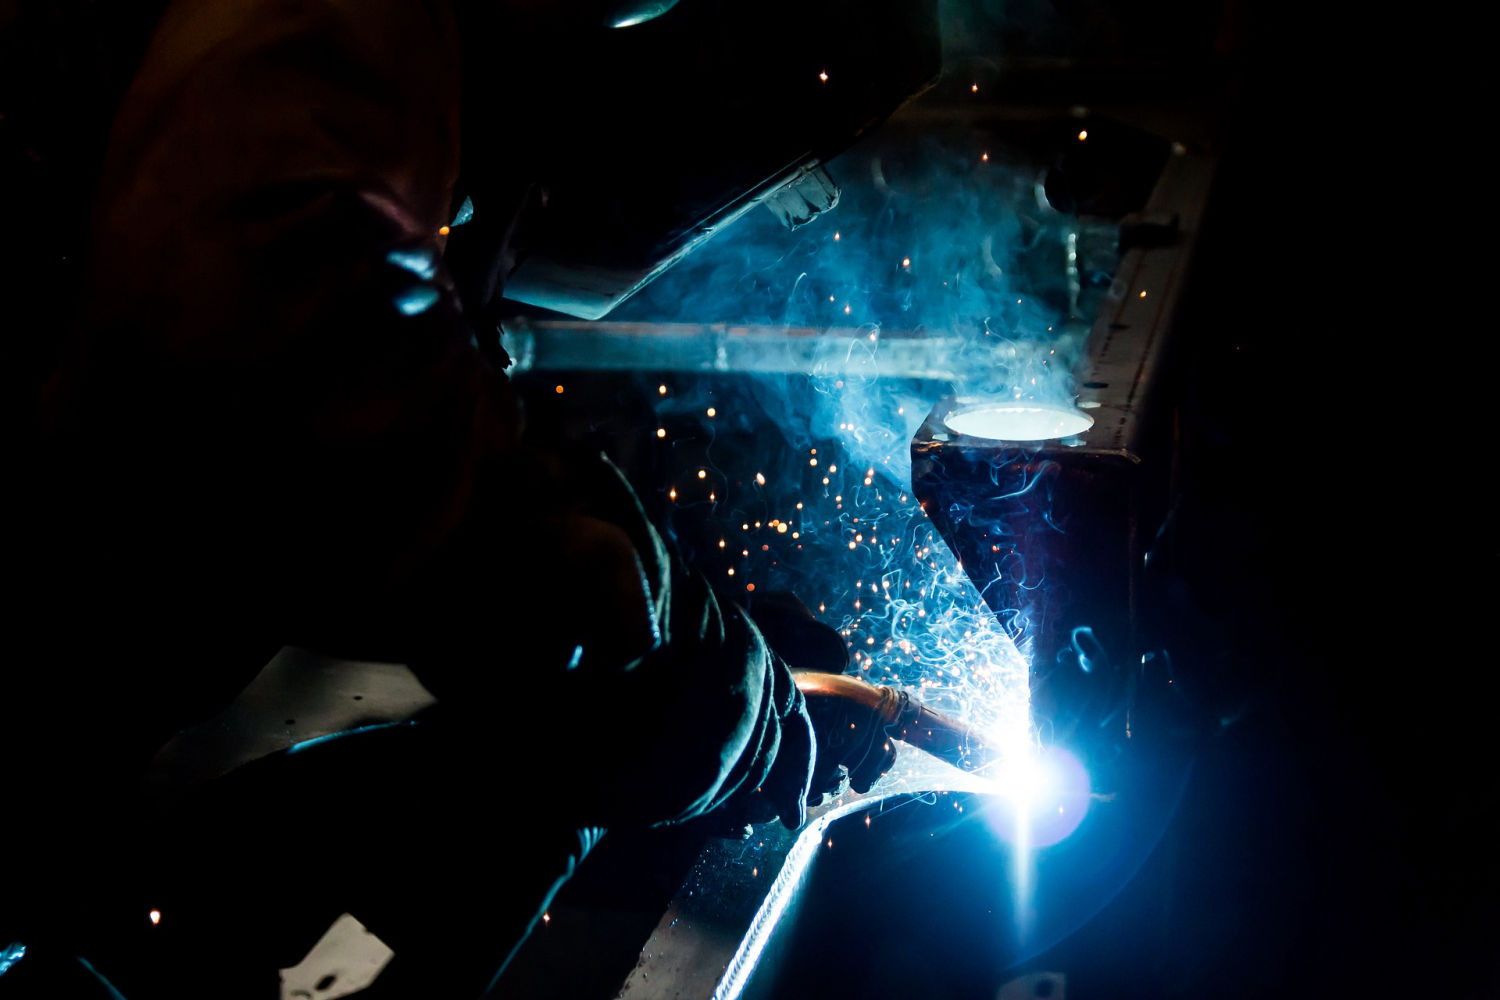 Image of Welding with sparks